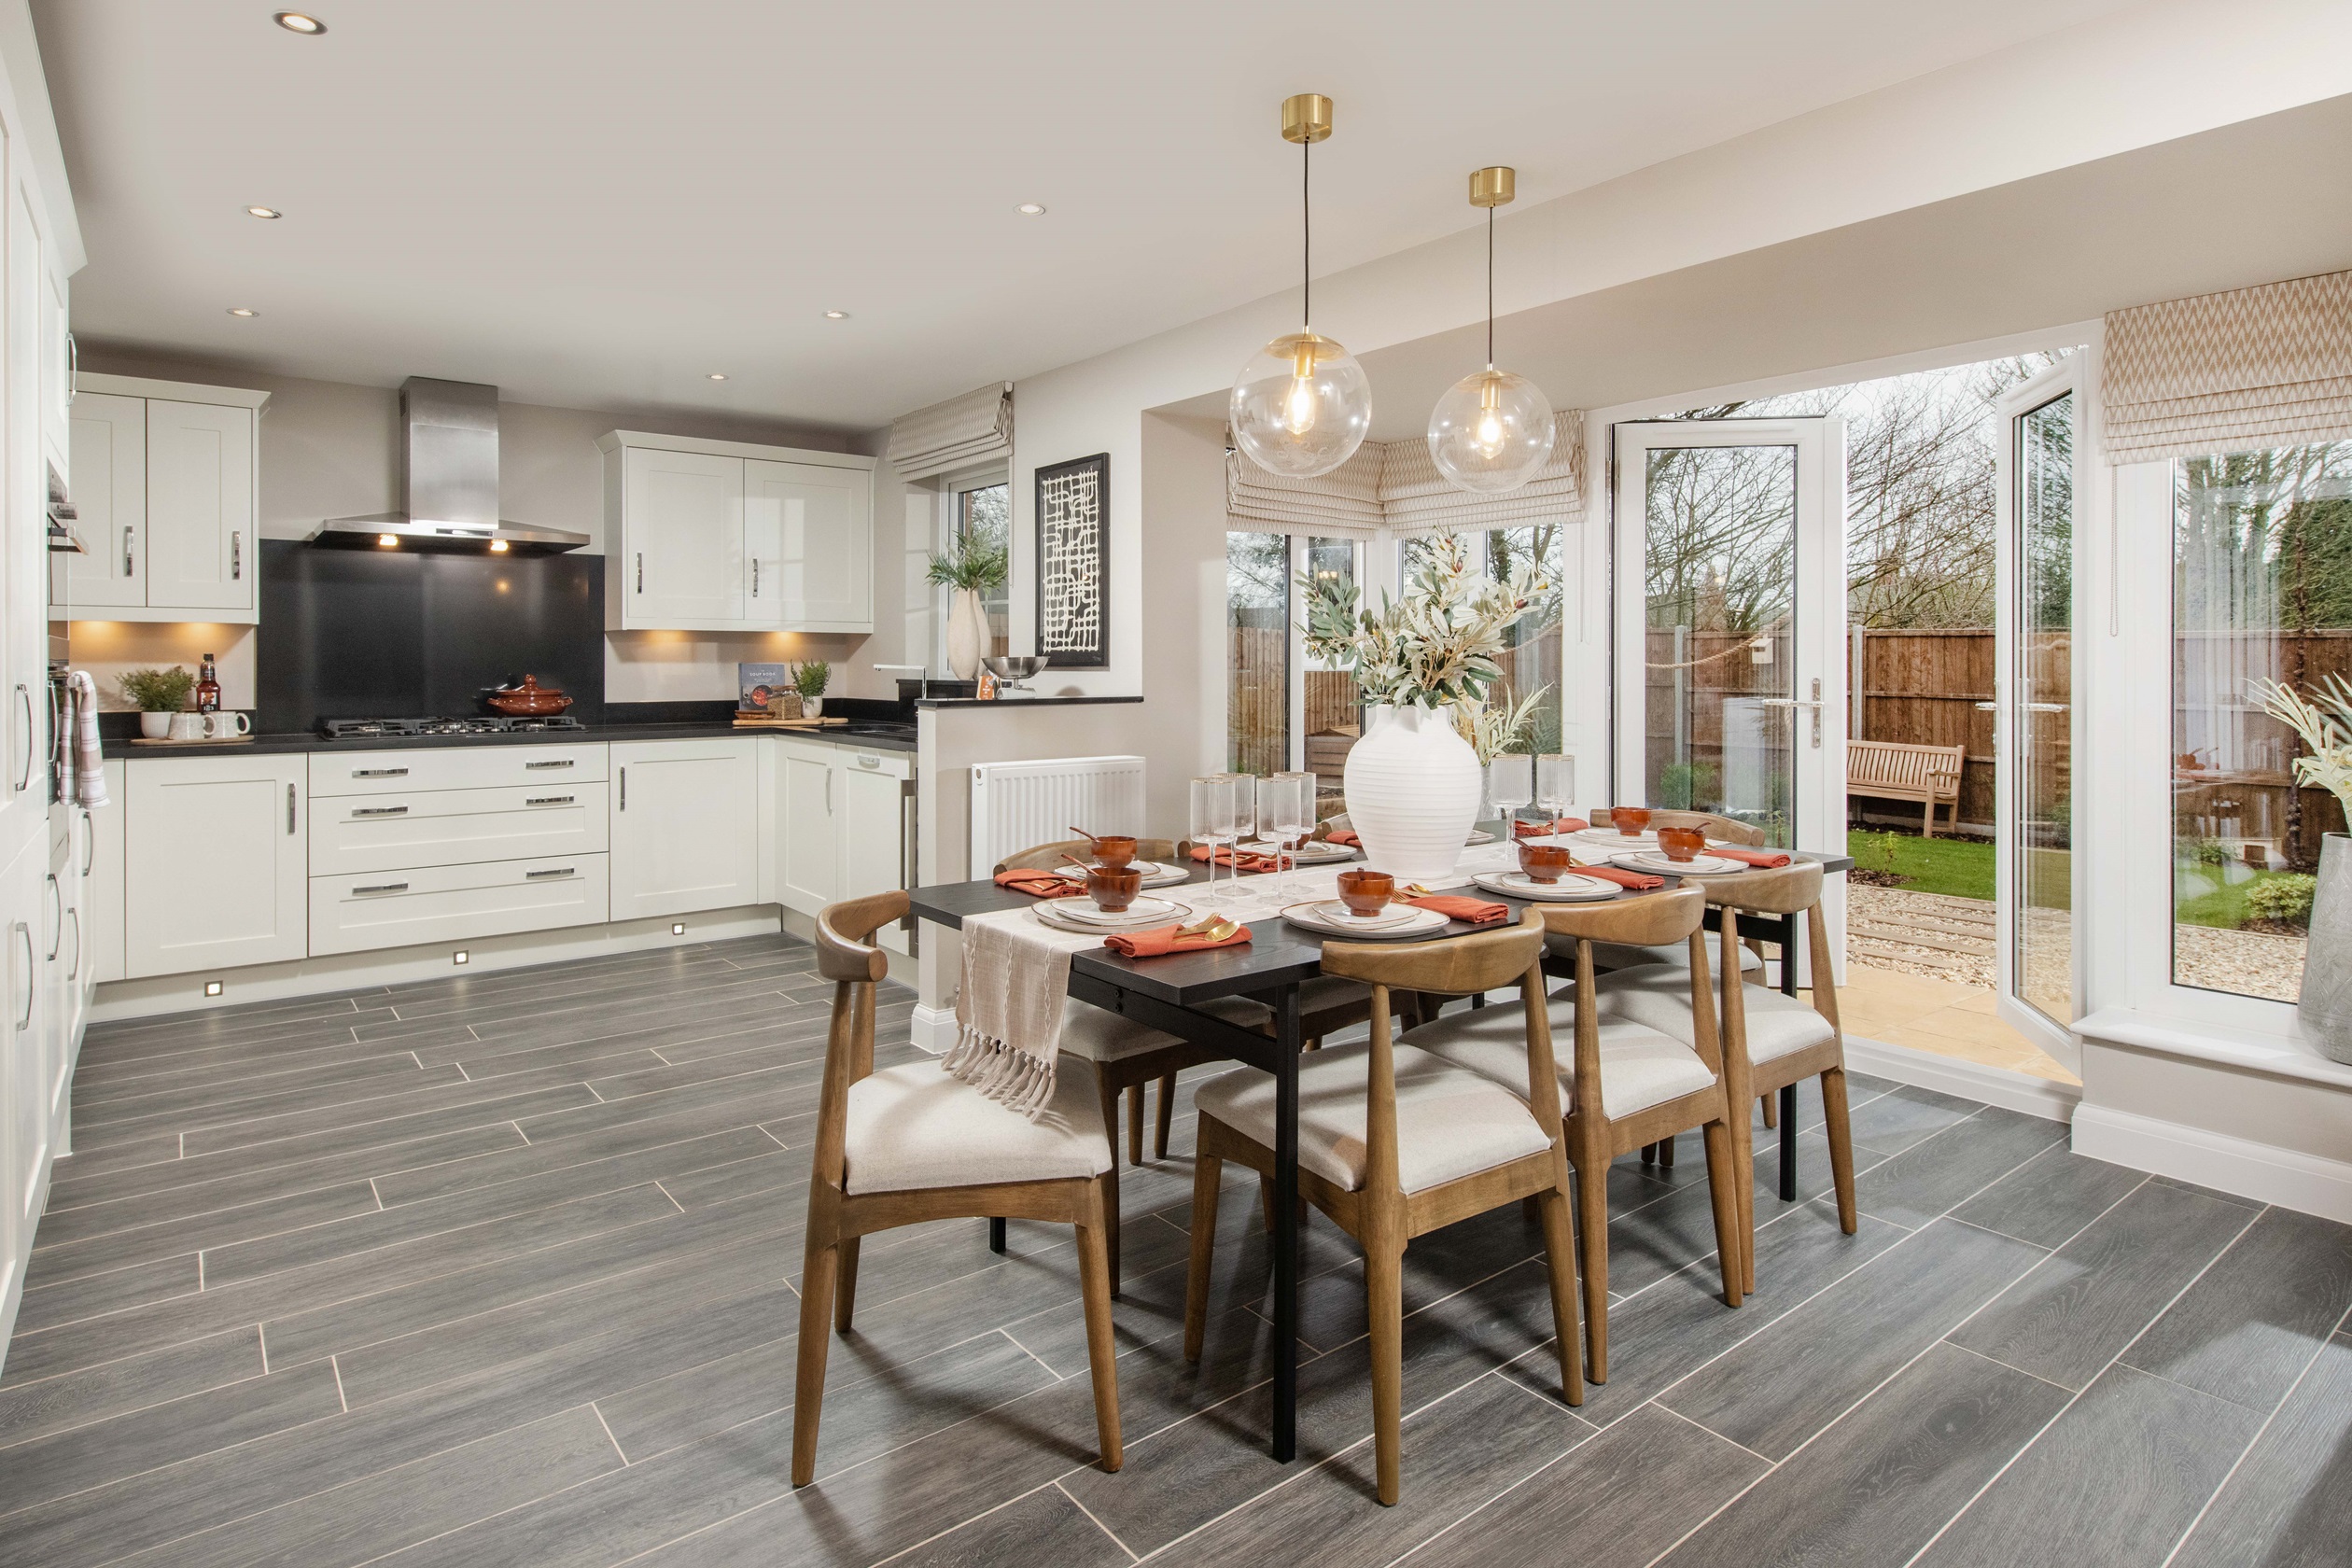 Property 2 of 9. Holden Kitchen-Diner With French Doors Open To The Garden